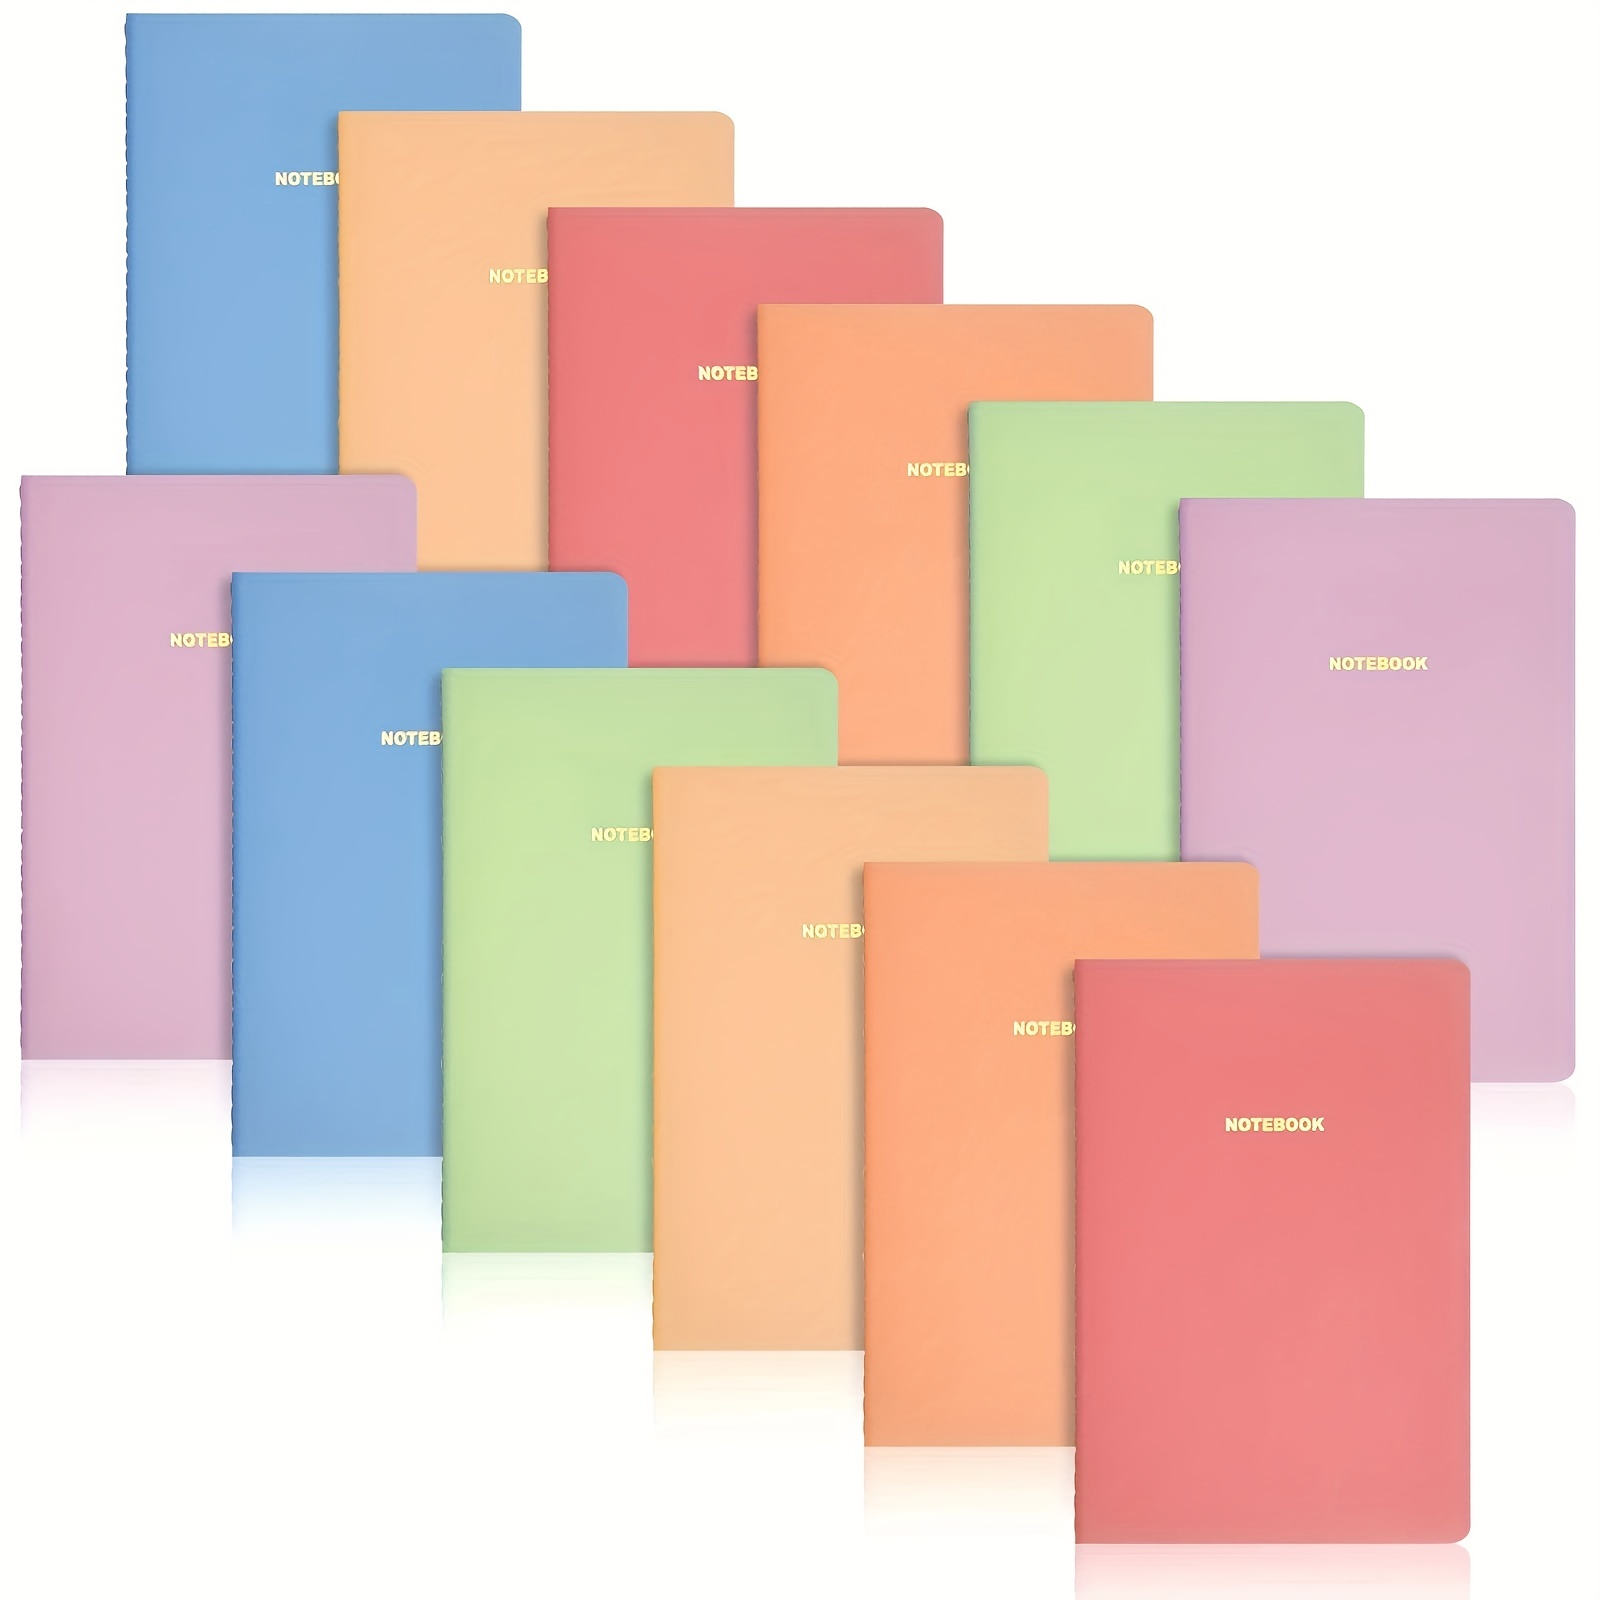 Wholesale 48 Pack Mini Notebooks Bulk, Small Pocket Notebook Set, Colorful  Notepad Bulk, Mini Journal Memo Notepads, 3.5'X5.5', 24 Sheets/48 Pages,  Lined - China School Notebook, College Ruled Notebook